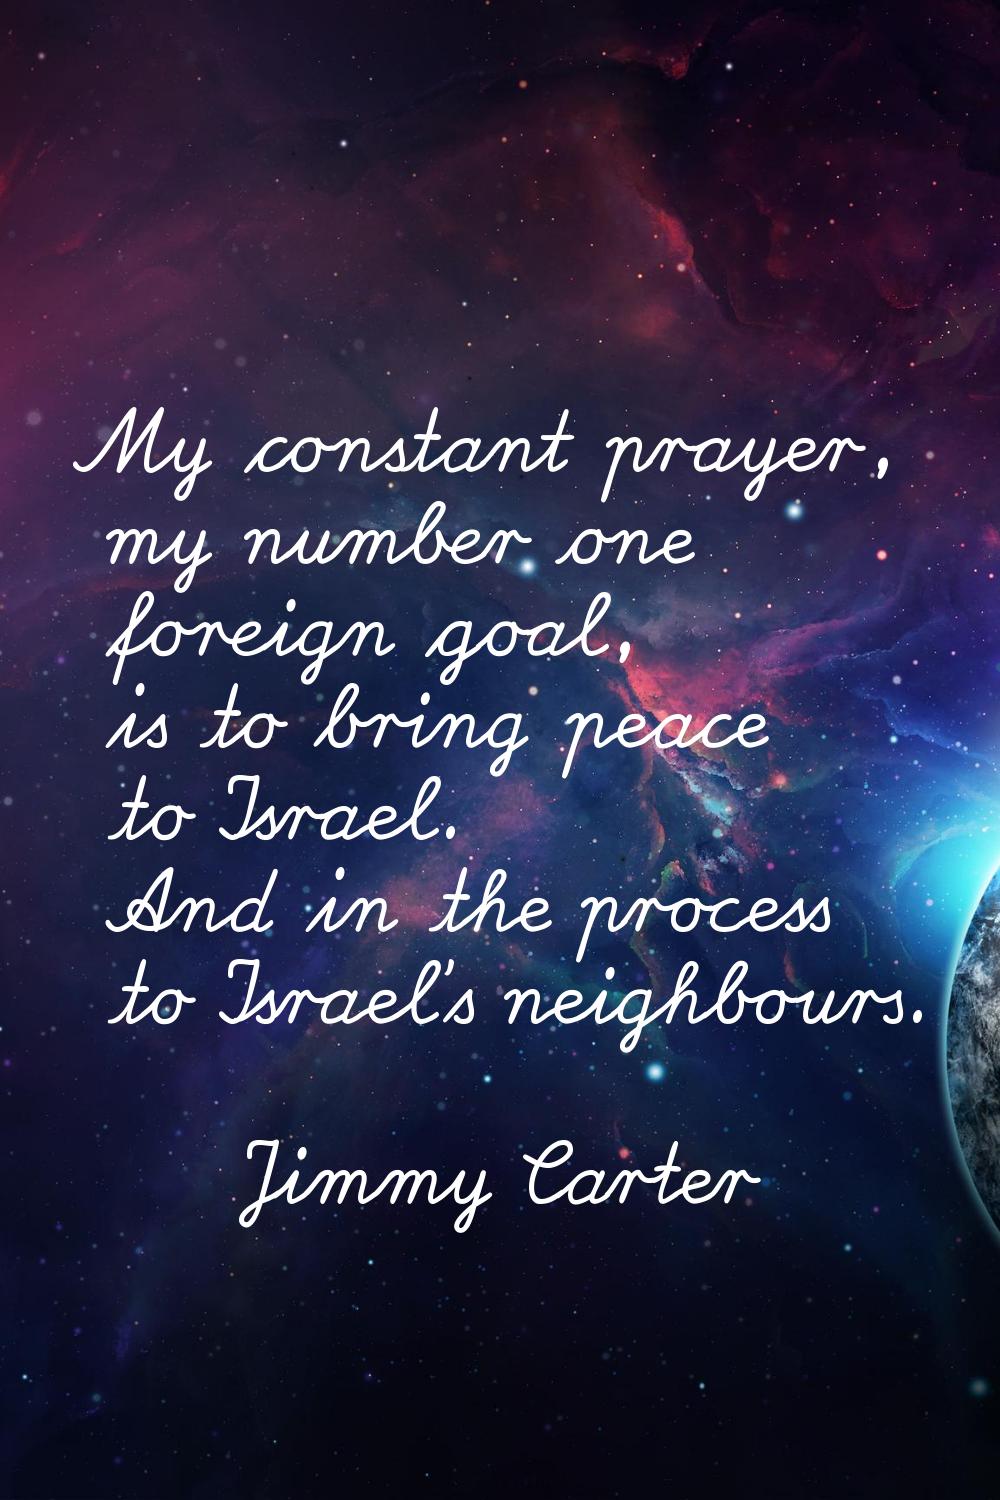 My constant prayer, my number one foreign goal, is to bring peace to Israel. And in the process to 